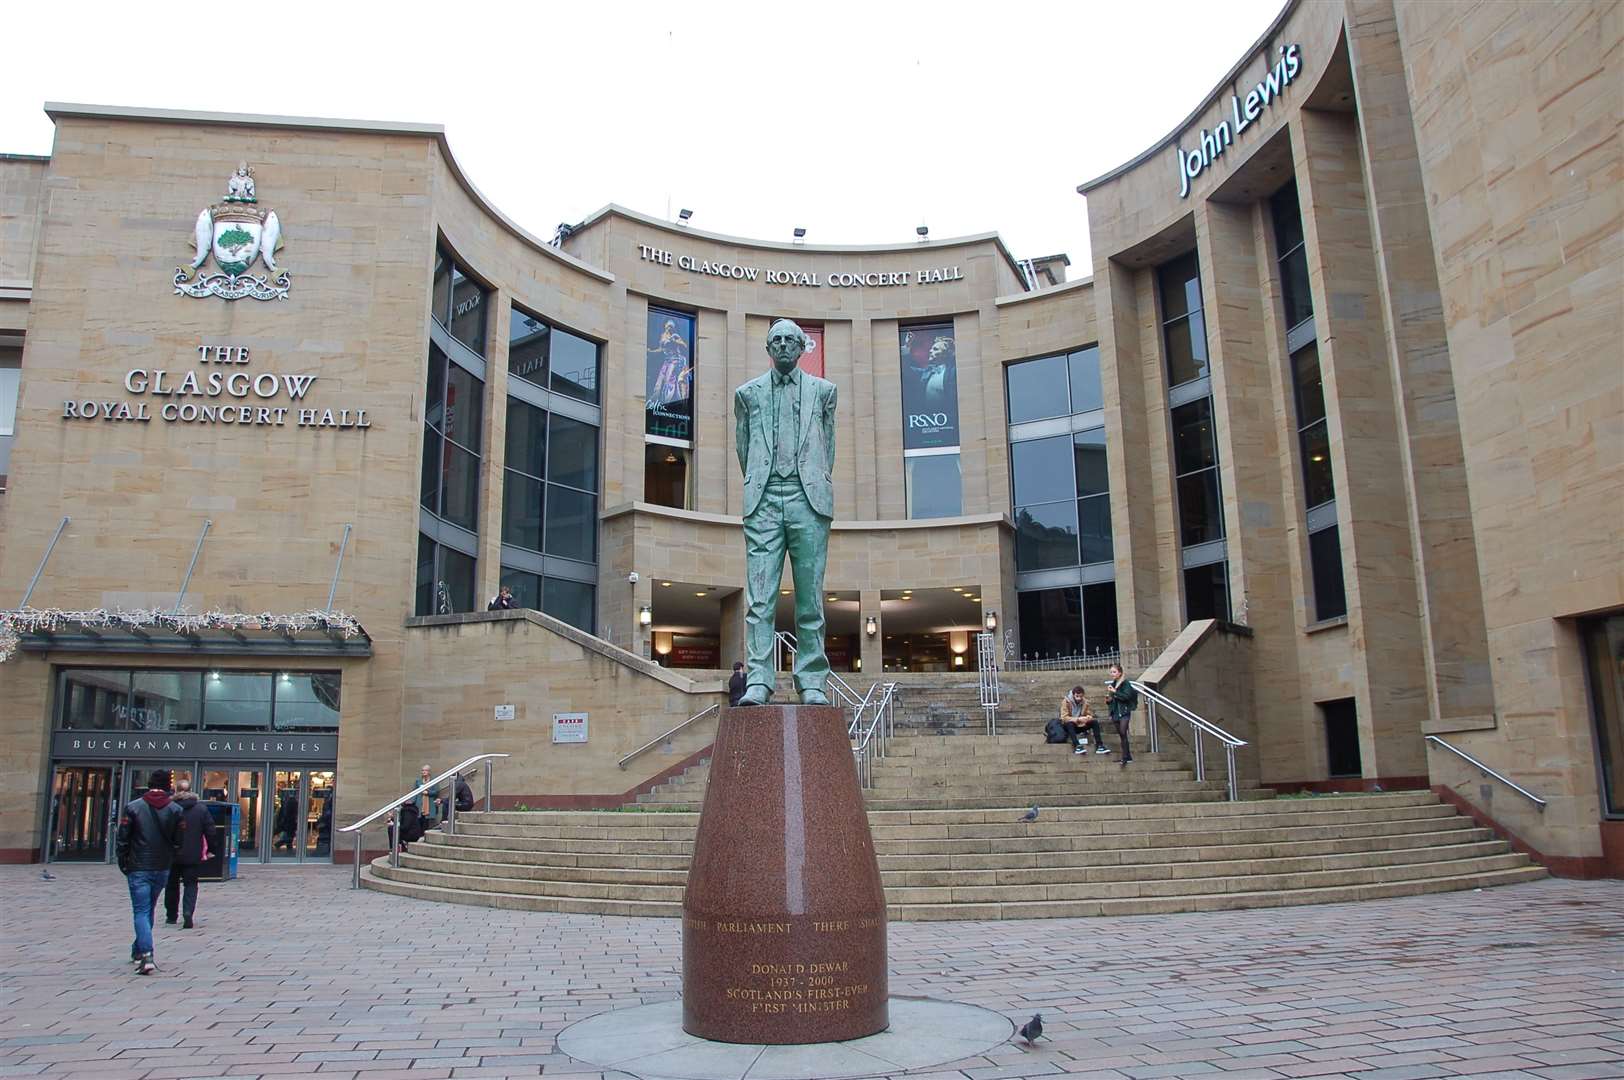 The late great Donald Dewar is commemorated in this Glasgow statue.